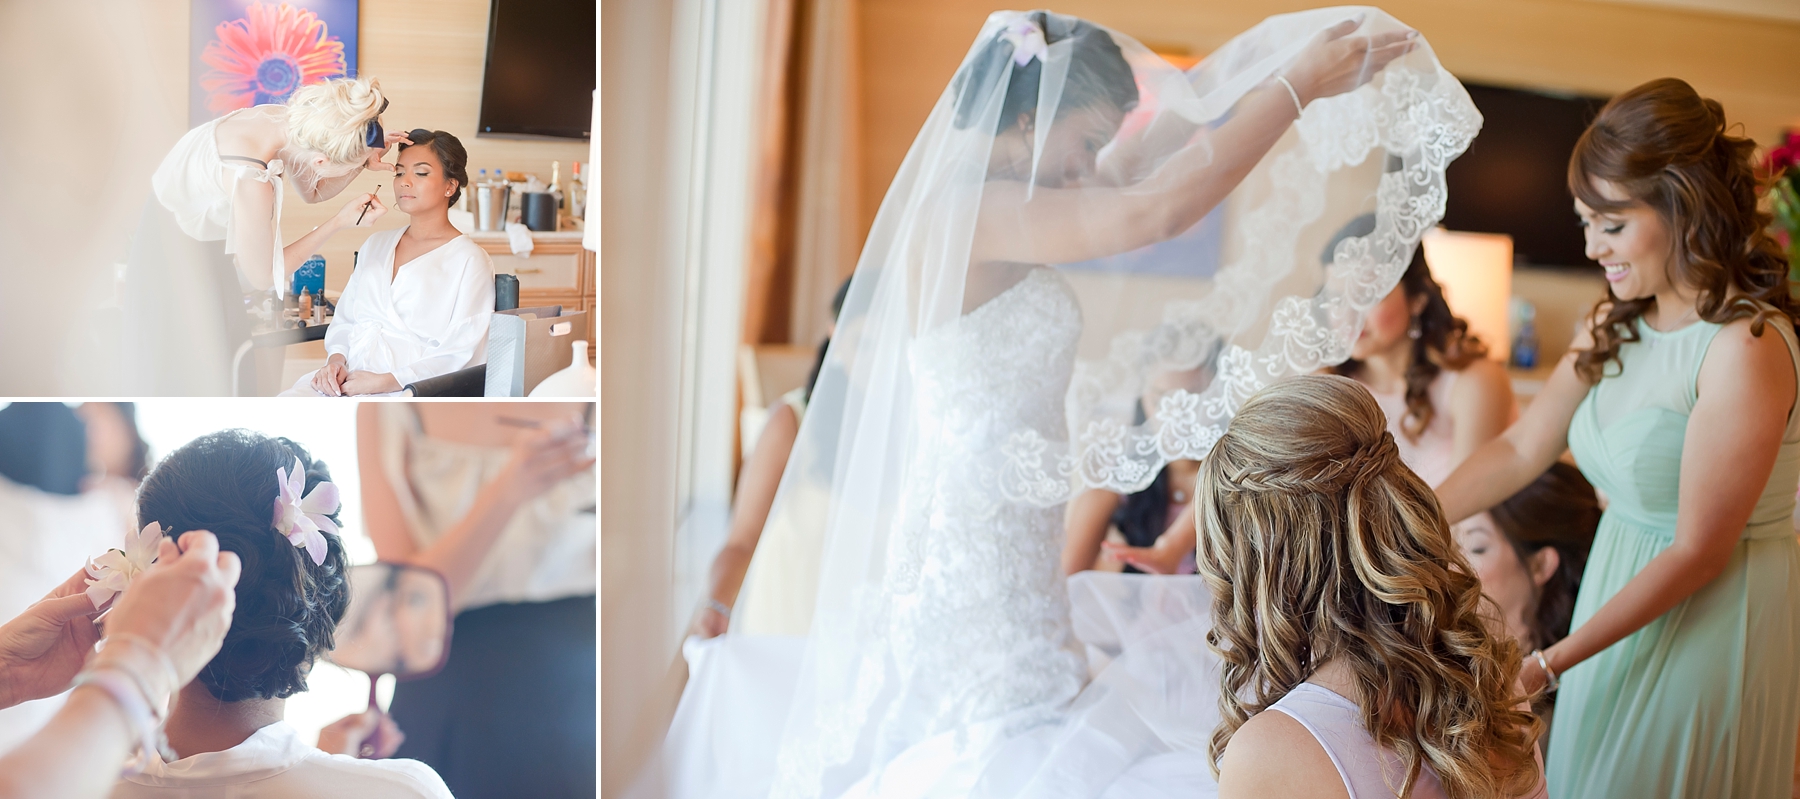 Hotel: Wynn | Hair+Makeup: Makeup in the 702 | Planner: Archel Rolwing Wedding + Events